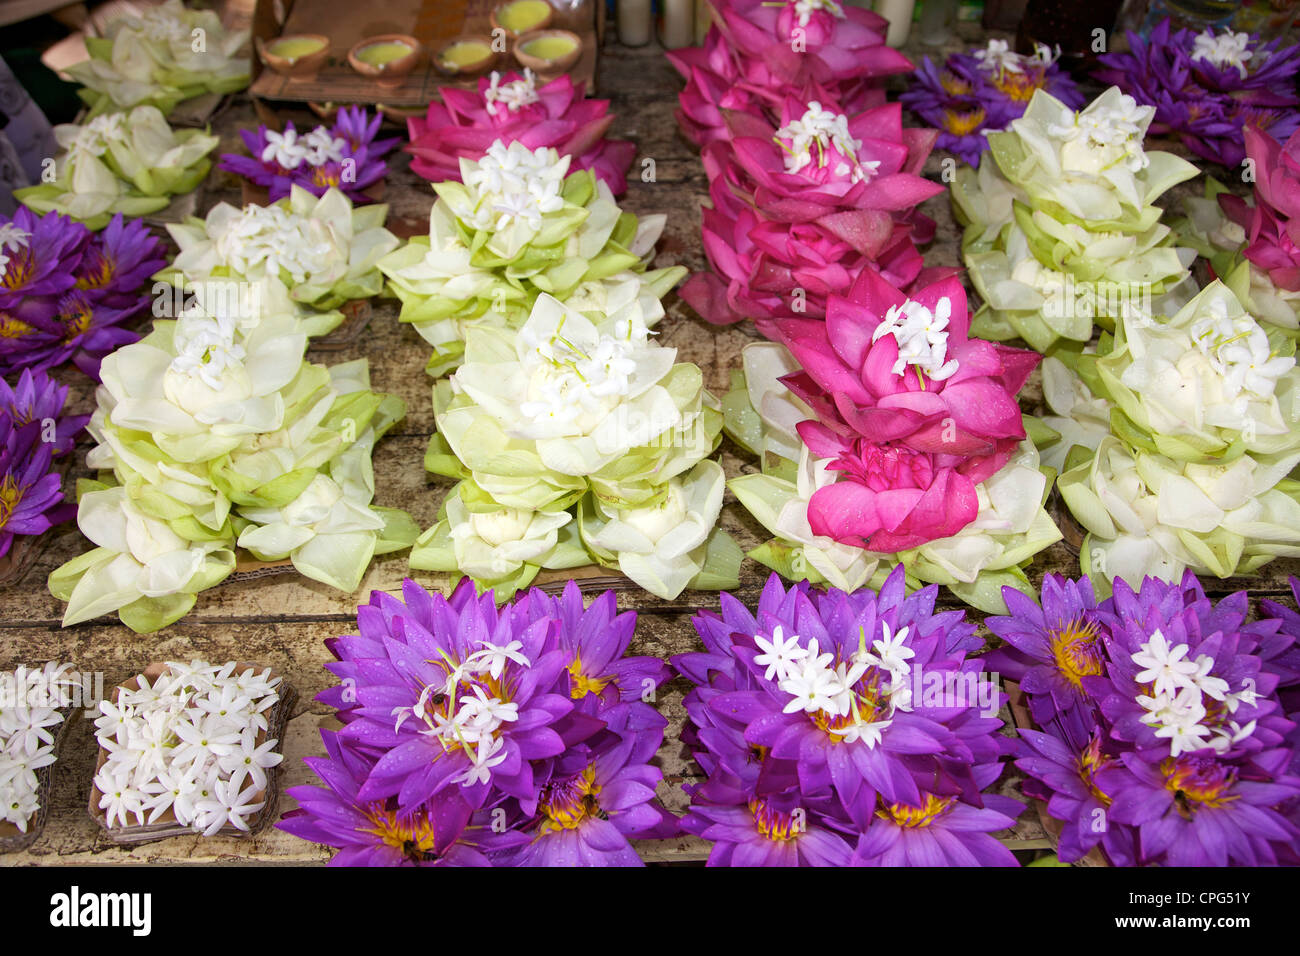 Lotus flowers used for offerings, Temple of the Tooth Relic or Sri Dalada Maligawa, Kandy Sri Lanka Stock Photo